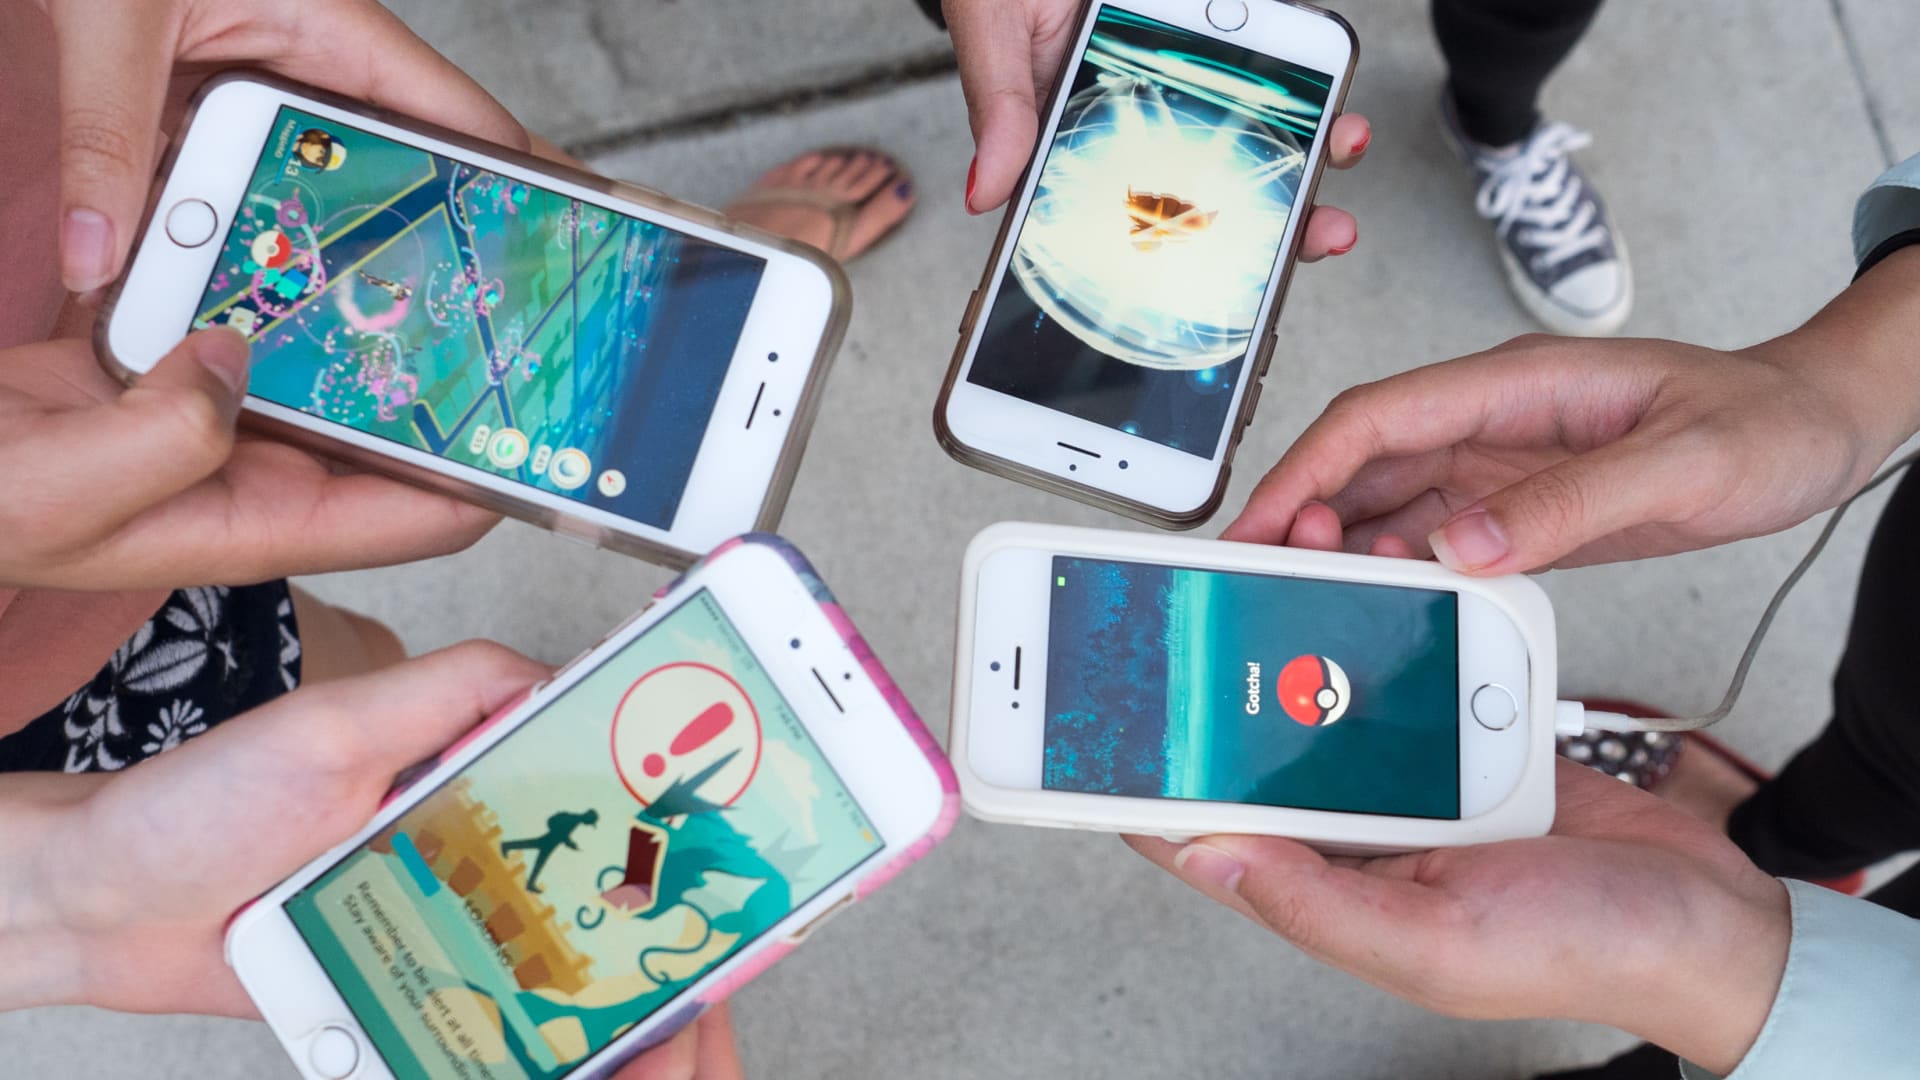 Pokemon Go maker Niantic lays off 230 employees, cancels games